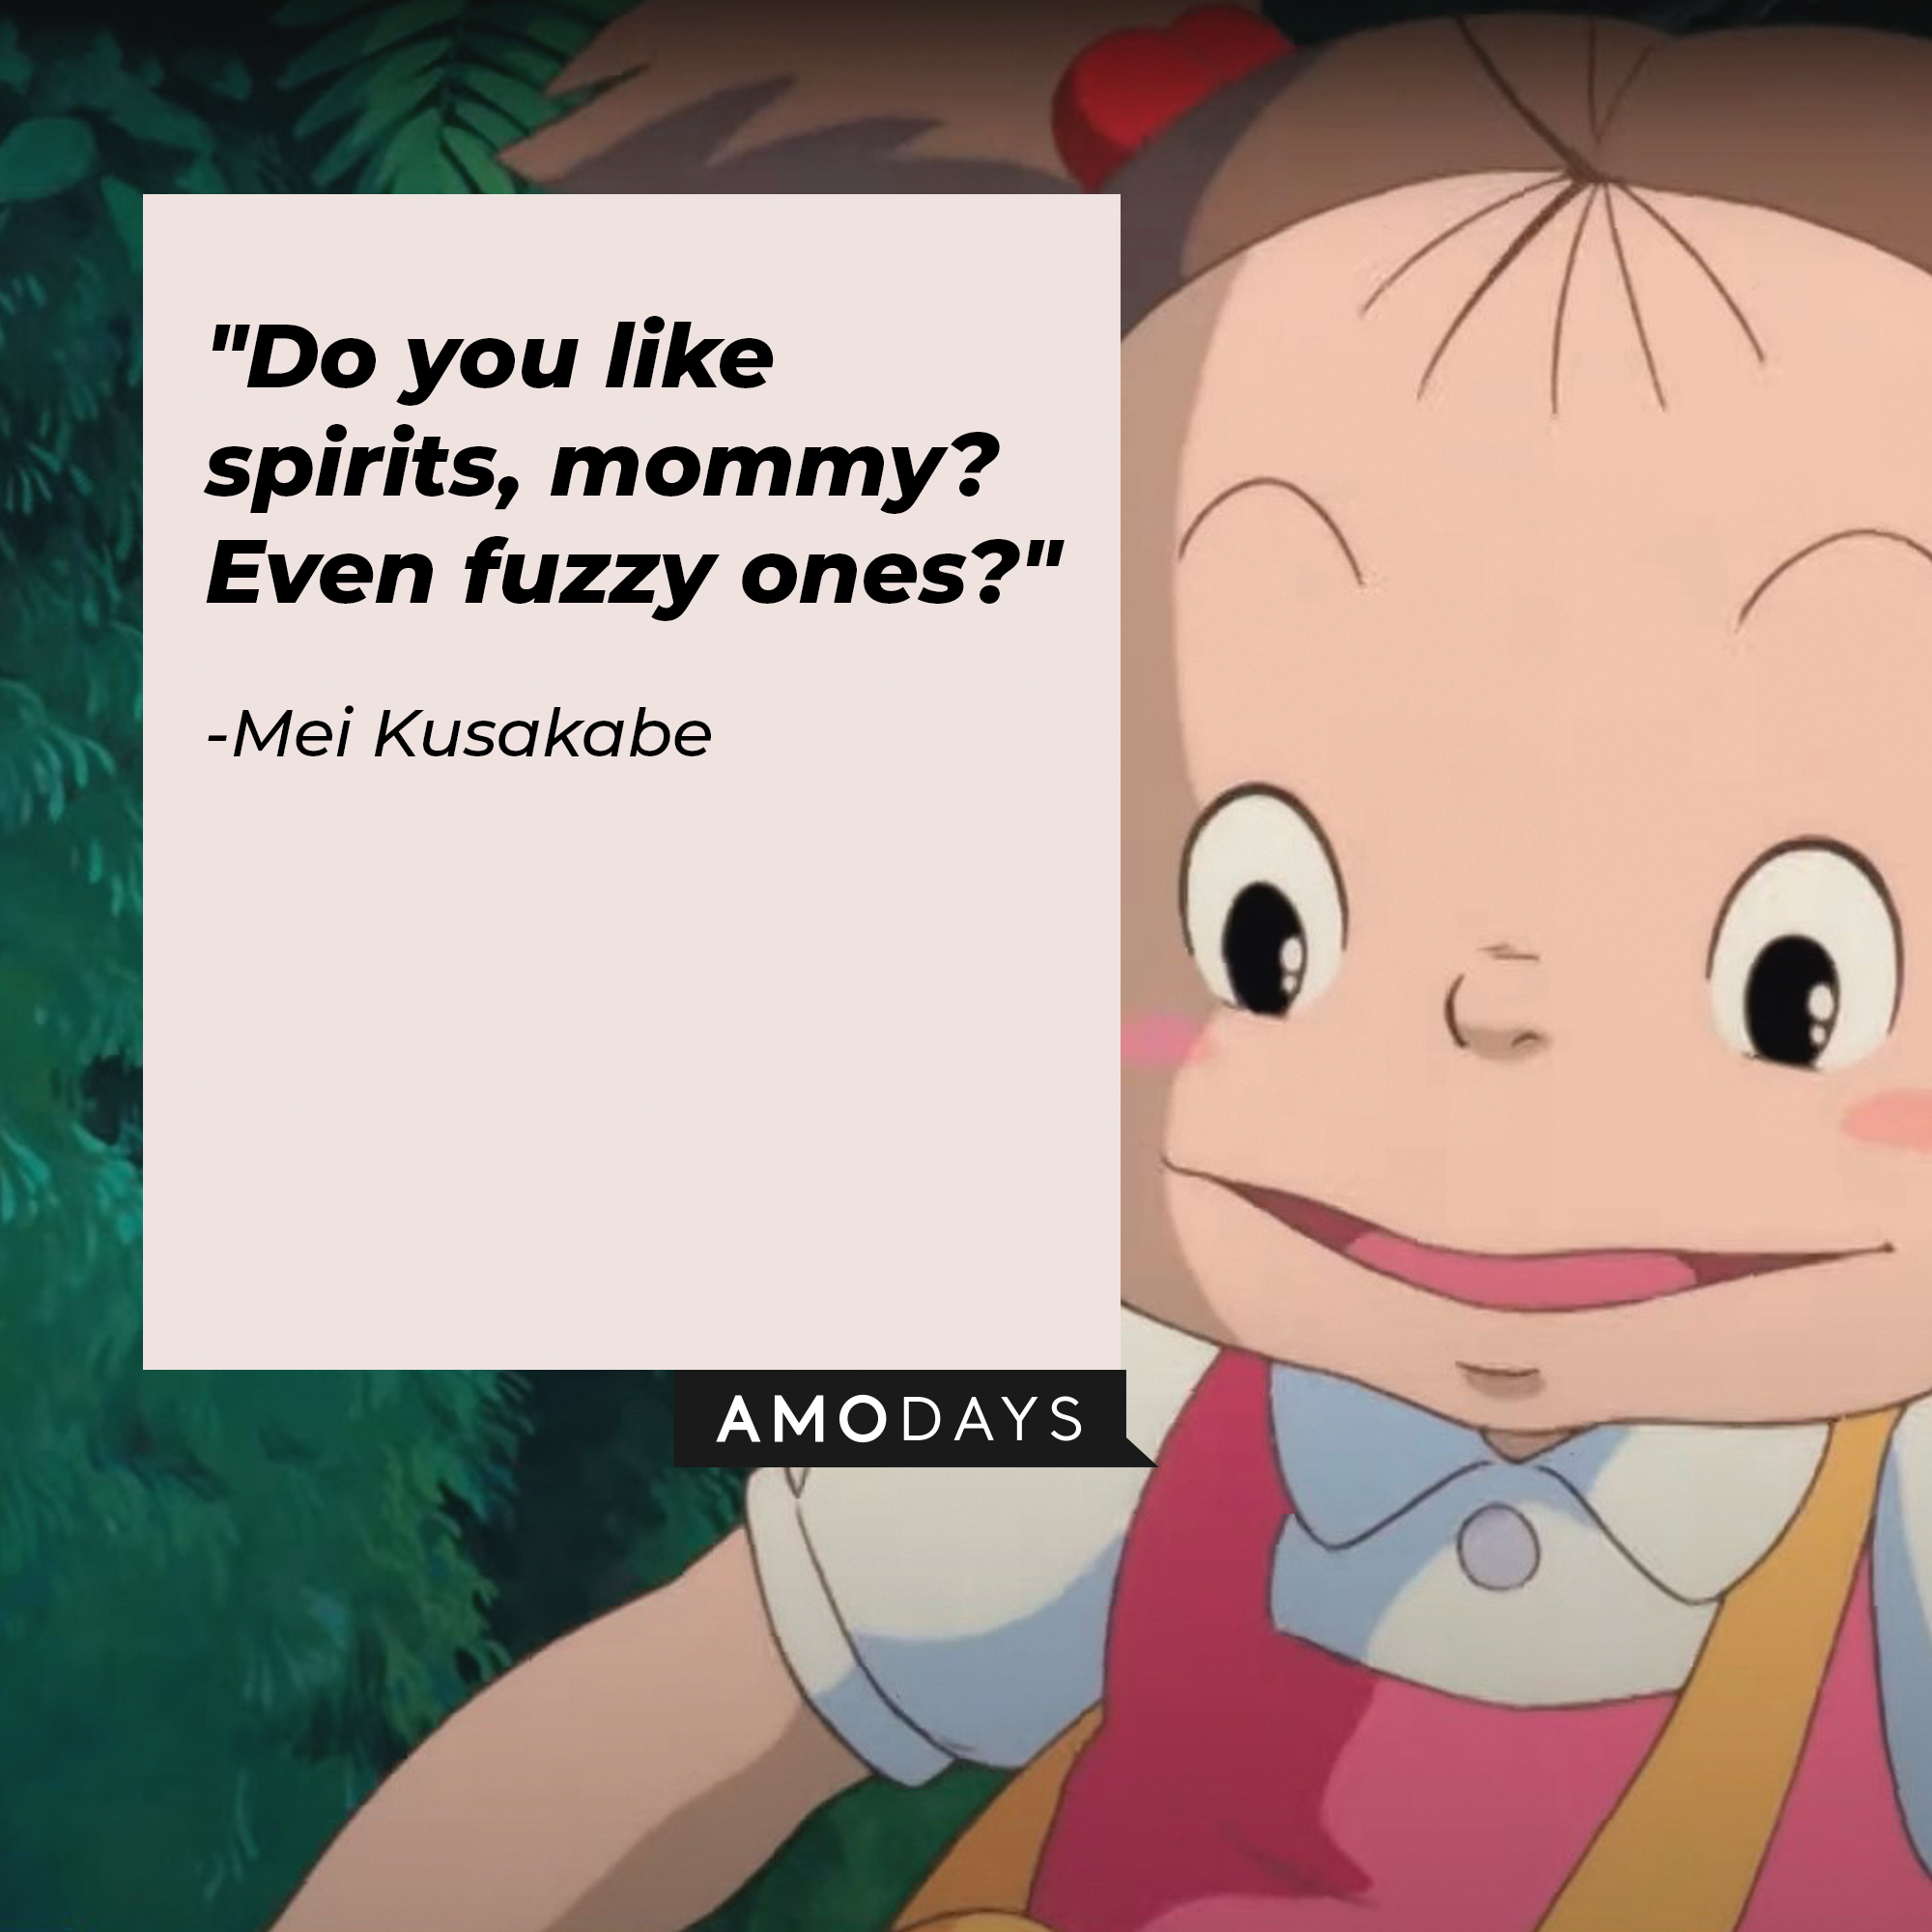 Mei Kusakabe's quote: "Do you like spirits, mommy? Even fuzzy ones?" | Source: Facebook.com/GhibliUSA